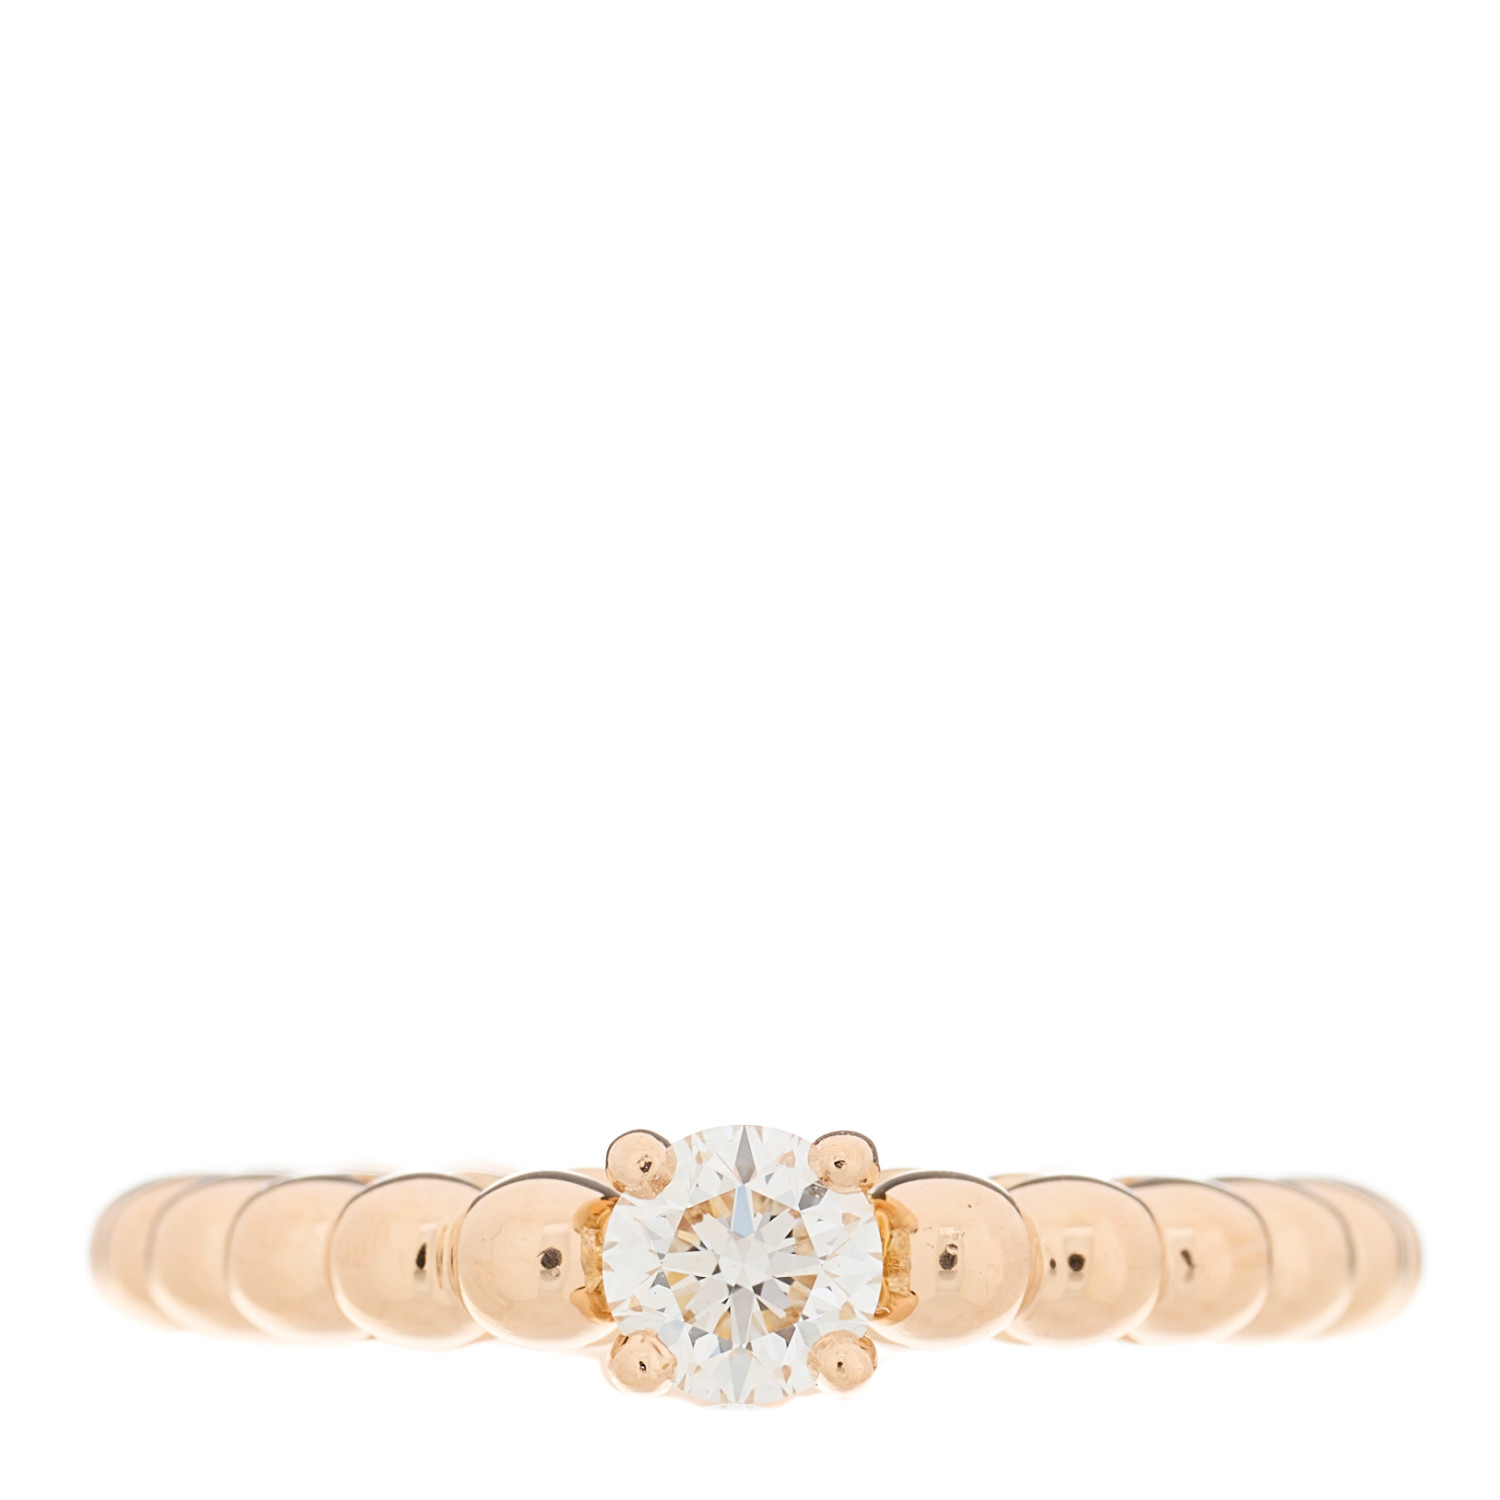 VAN CLEEF & ARPELS 18K Rose Gold Diamond .30ct Perlee Solitaire Engagement Ring by FASHIONPHILE